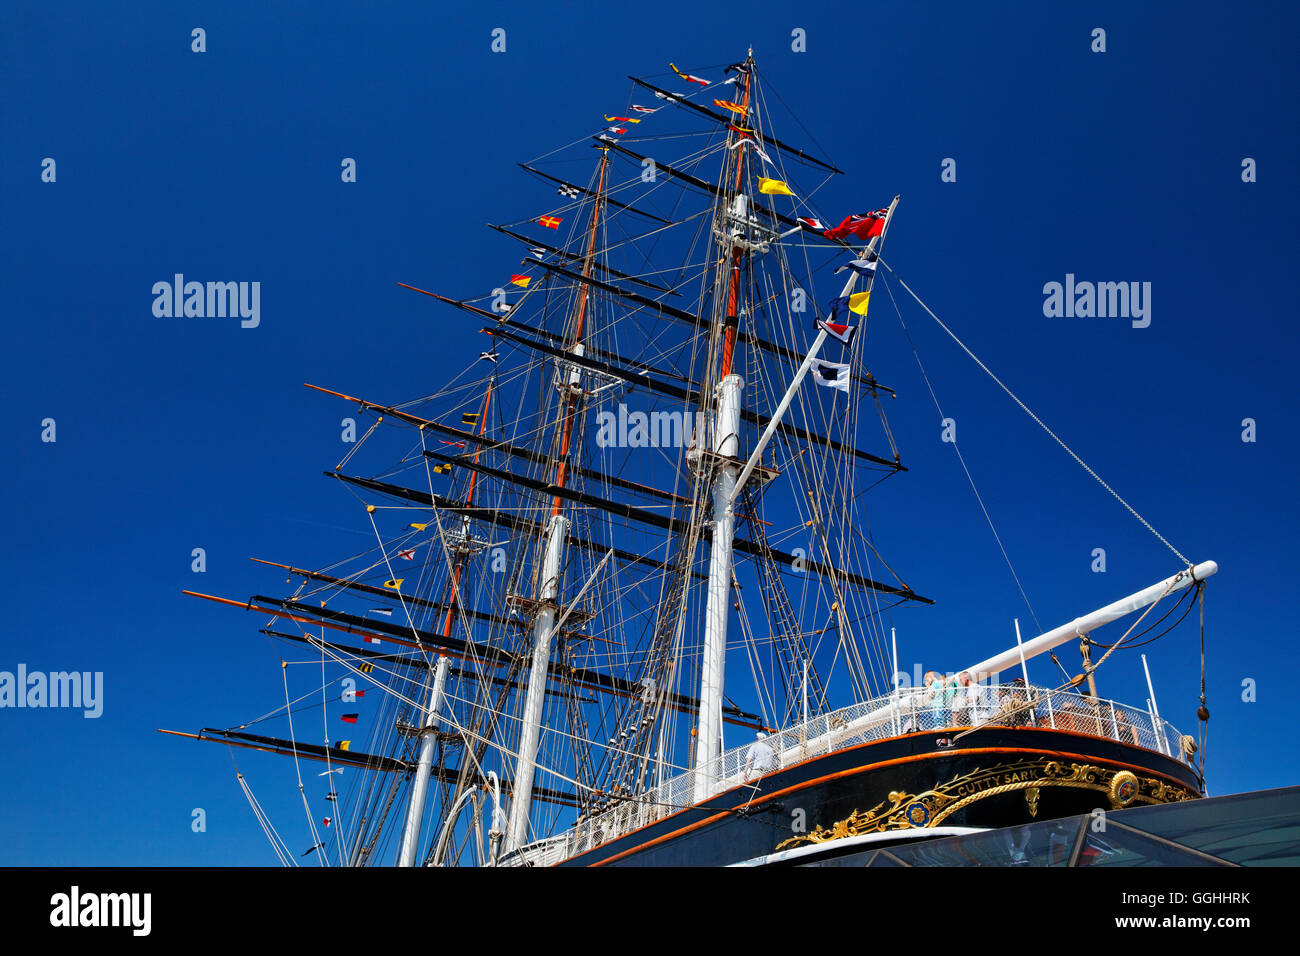 Cutty Sark Museum, Greenwich, London, England, United Kingdom Banque D'Images